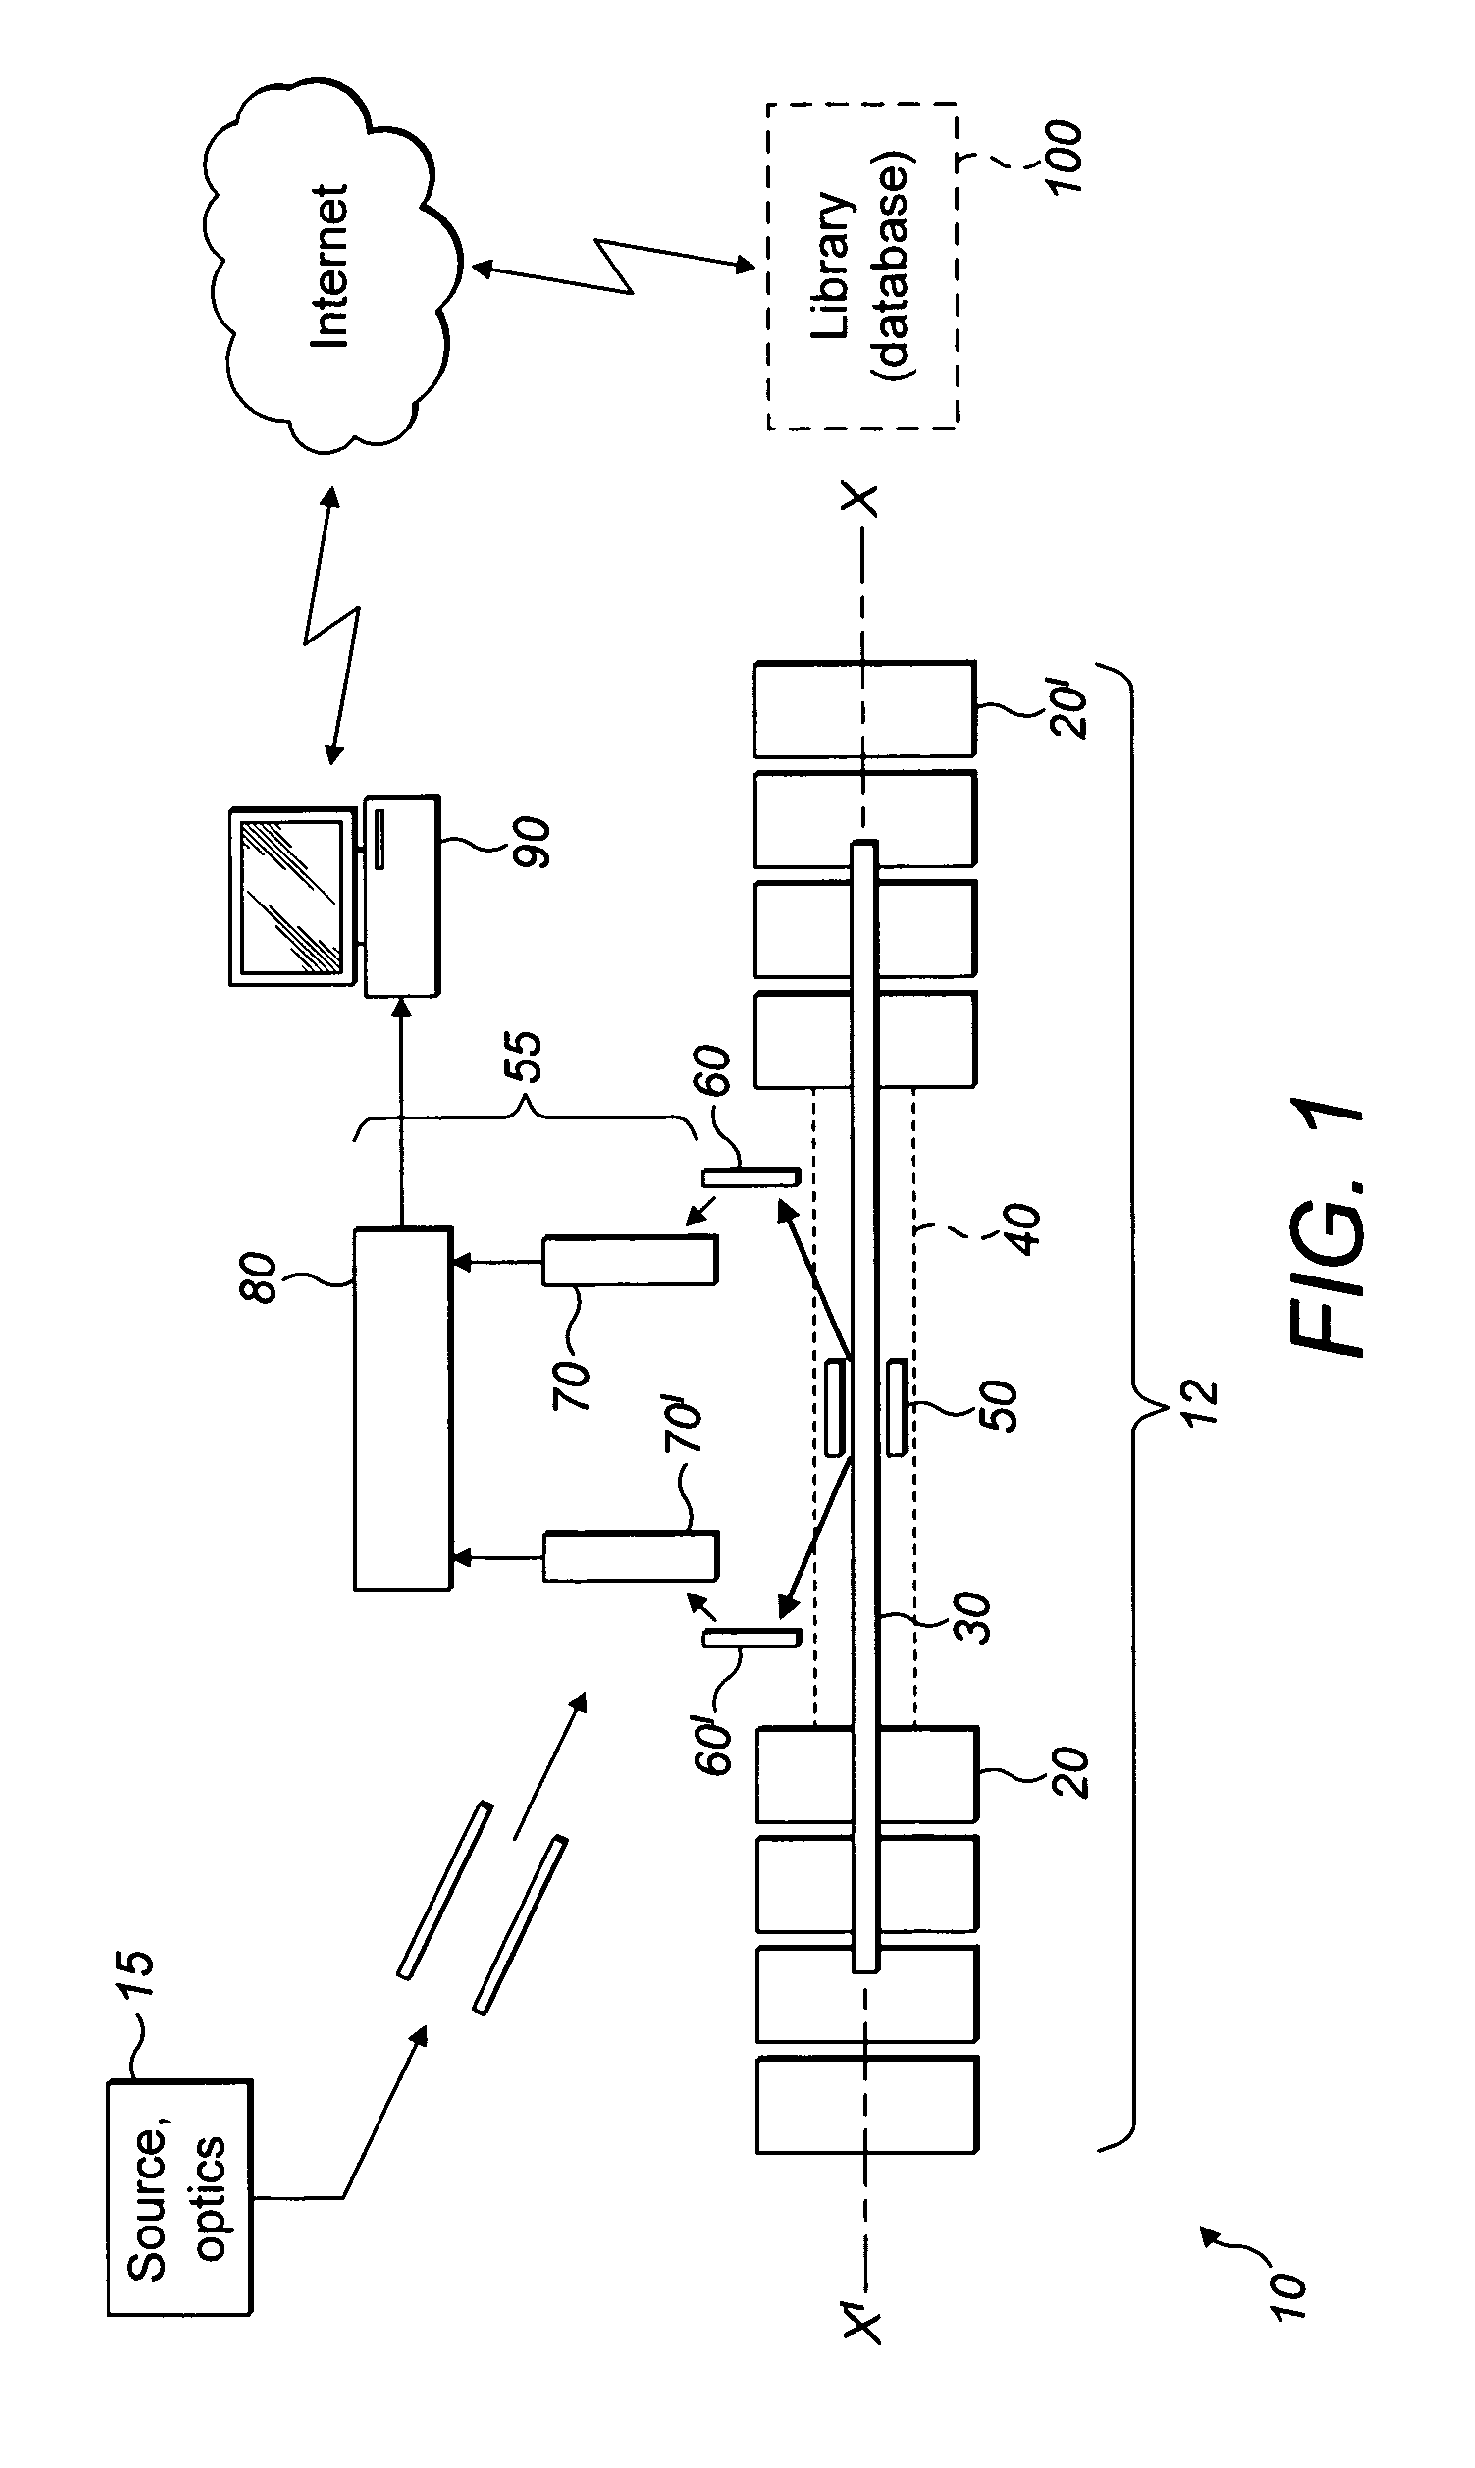 Method of multi-reflecting timeof flight mass spectrometry with spectral peaks arranged in order of ion ejection from the mass spectrometer